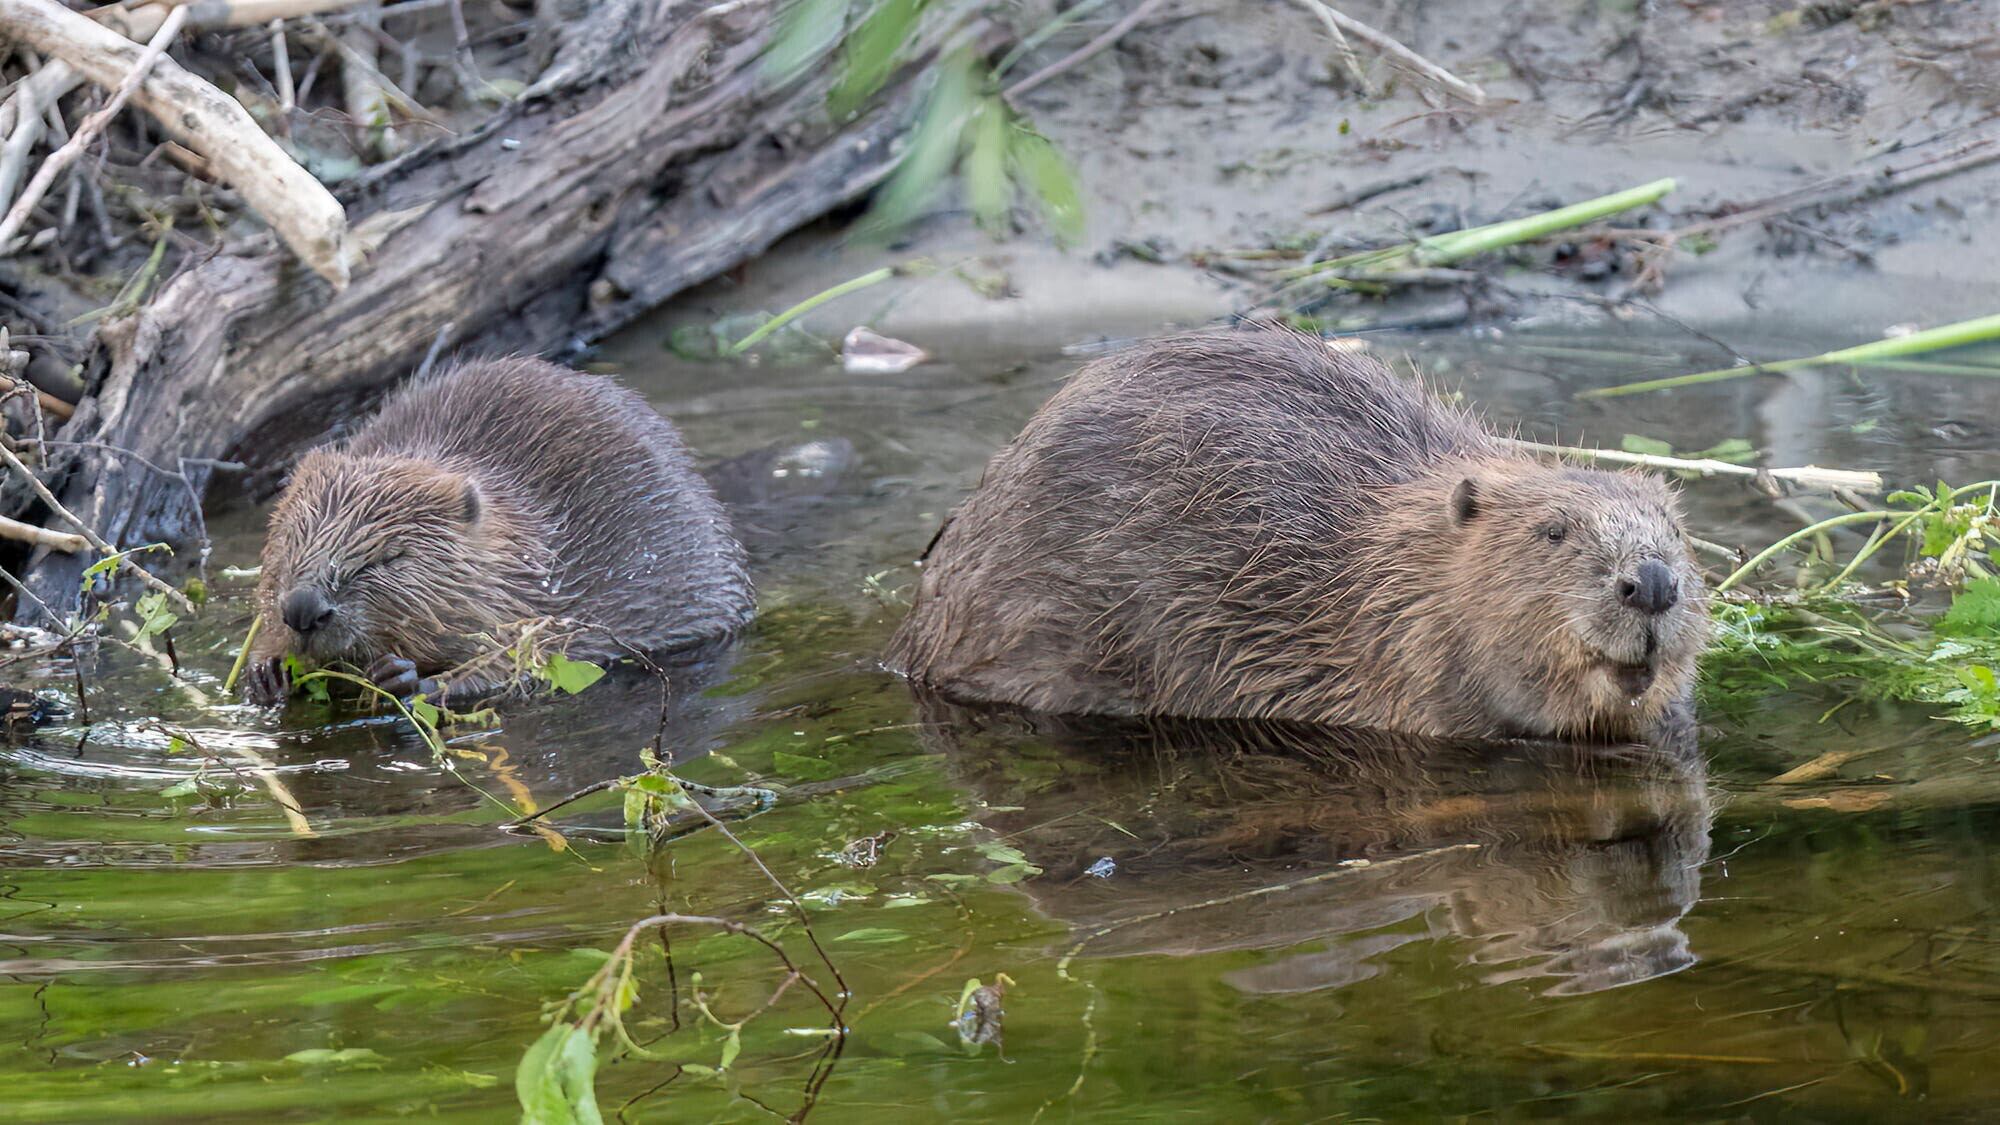 The pair of beavers are set to be released in an enclosure at Ewhurst Park, near Basingstoke.